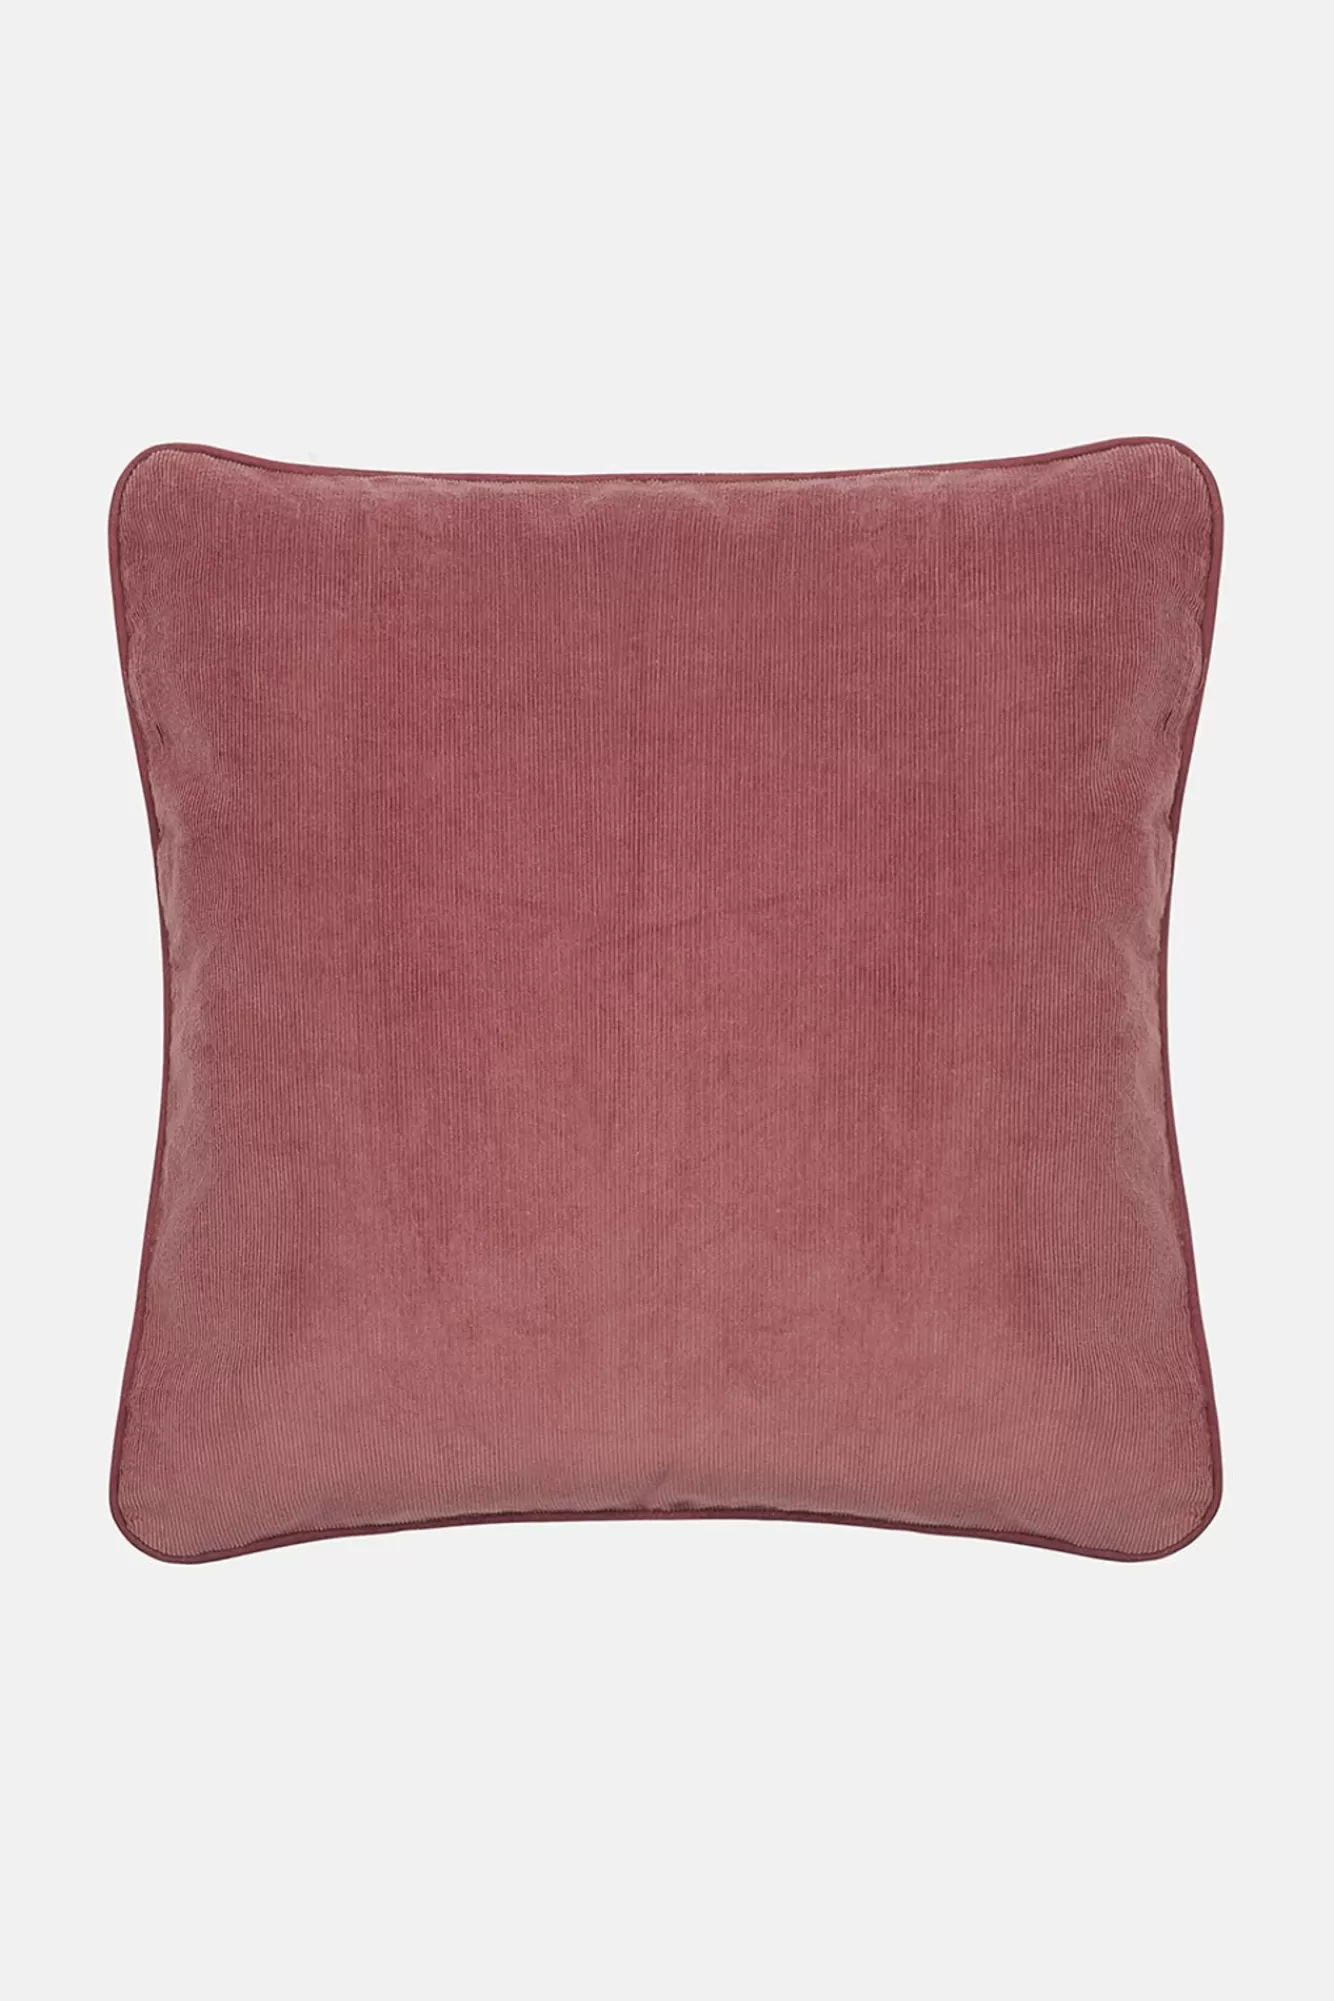 Cushion Cover: Deadstock Fabric - Ash Pink Cord-Lucy & Yak Discount